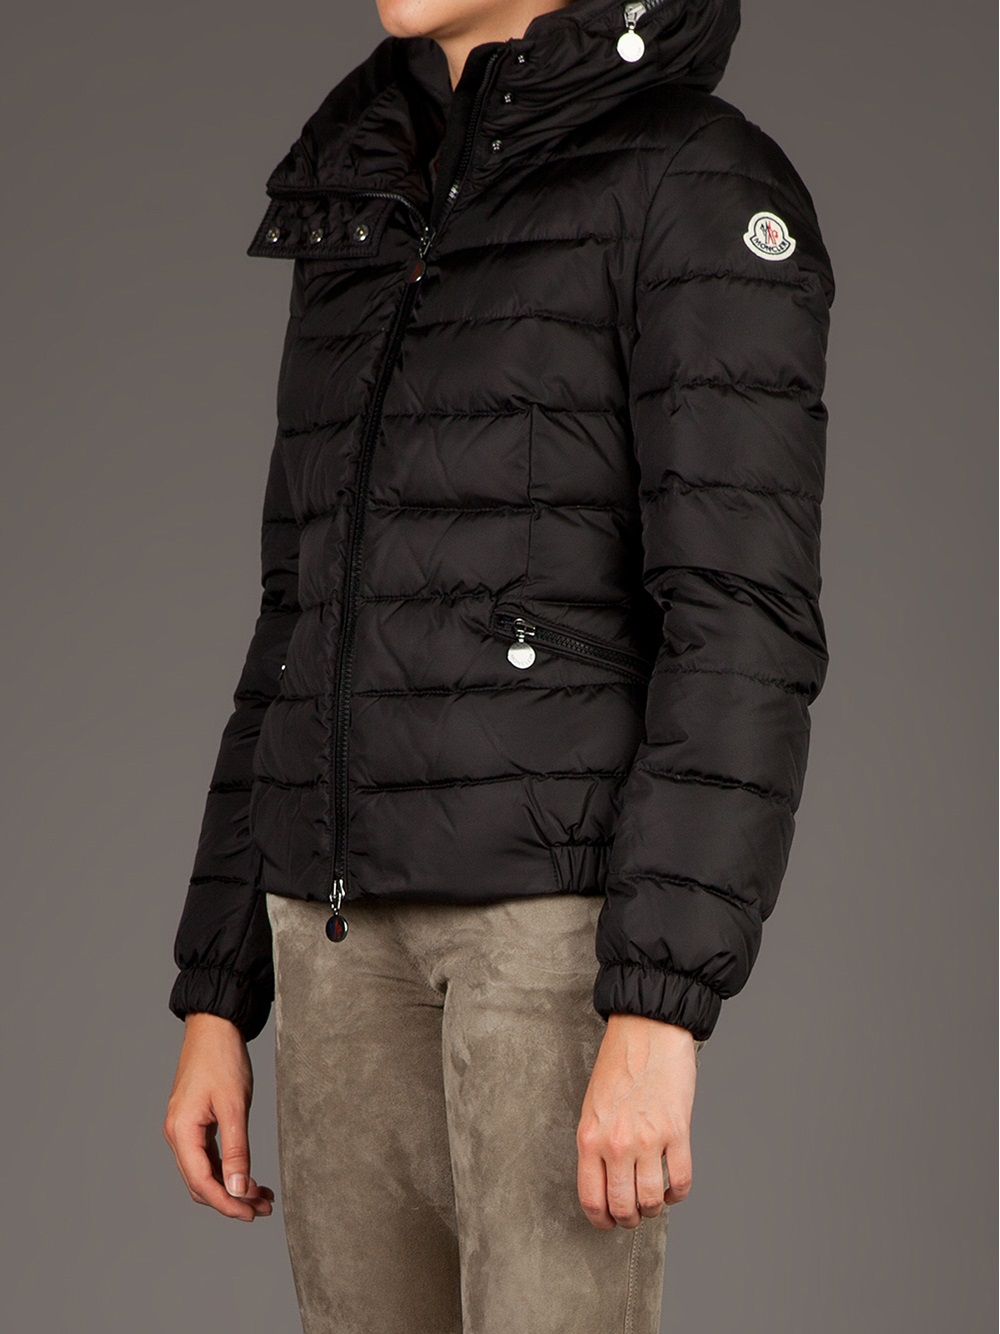 Moncler Sanglier Padded Jacket in Black - Lyst